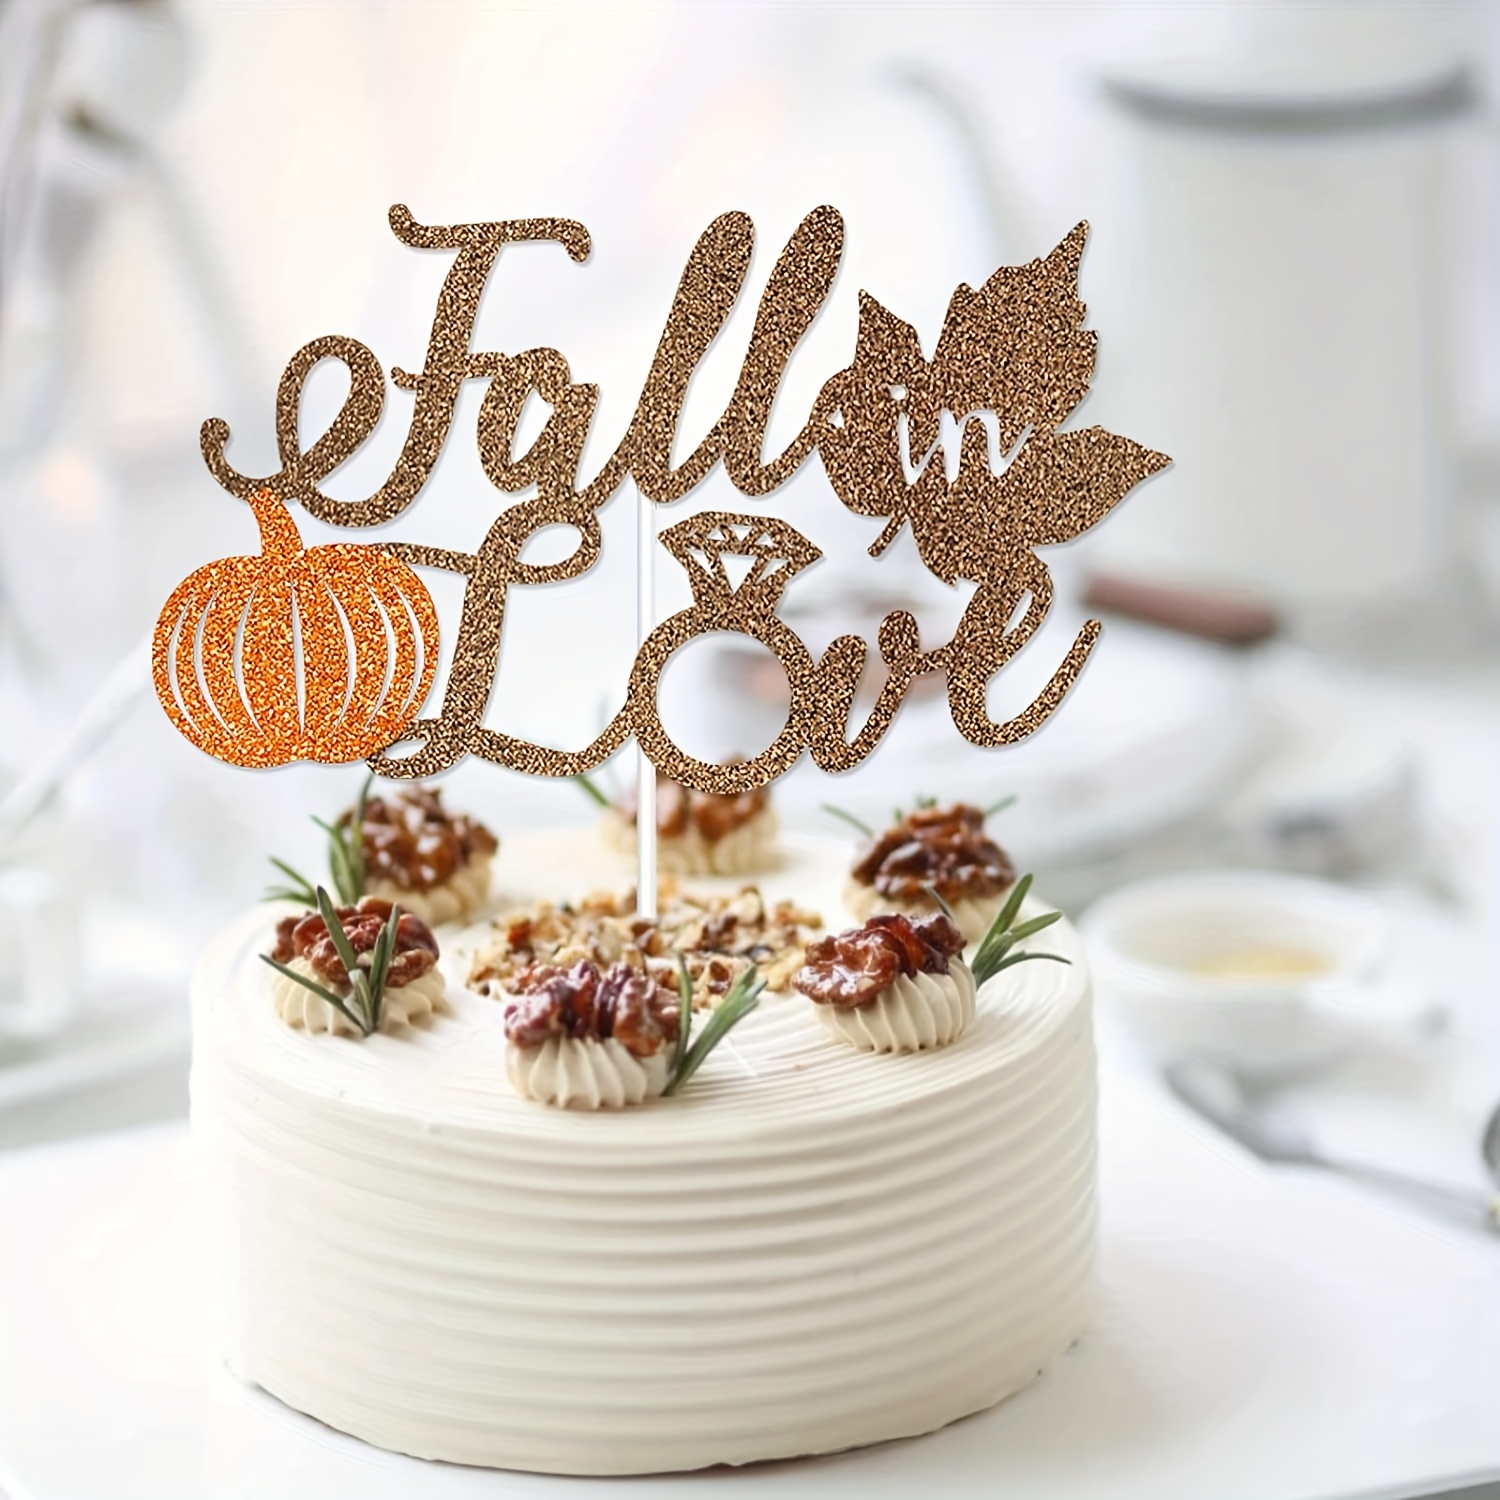 The 10 Best Wedding Cakes in Maple Grove, MN - WeddingWire